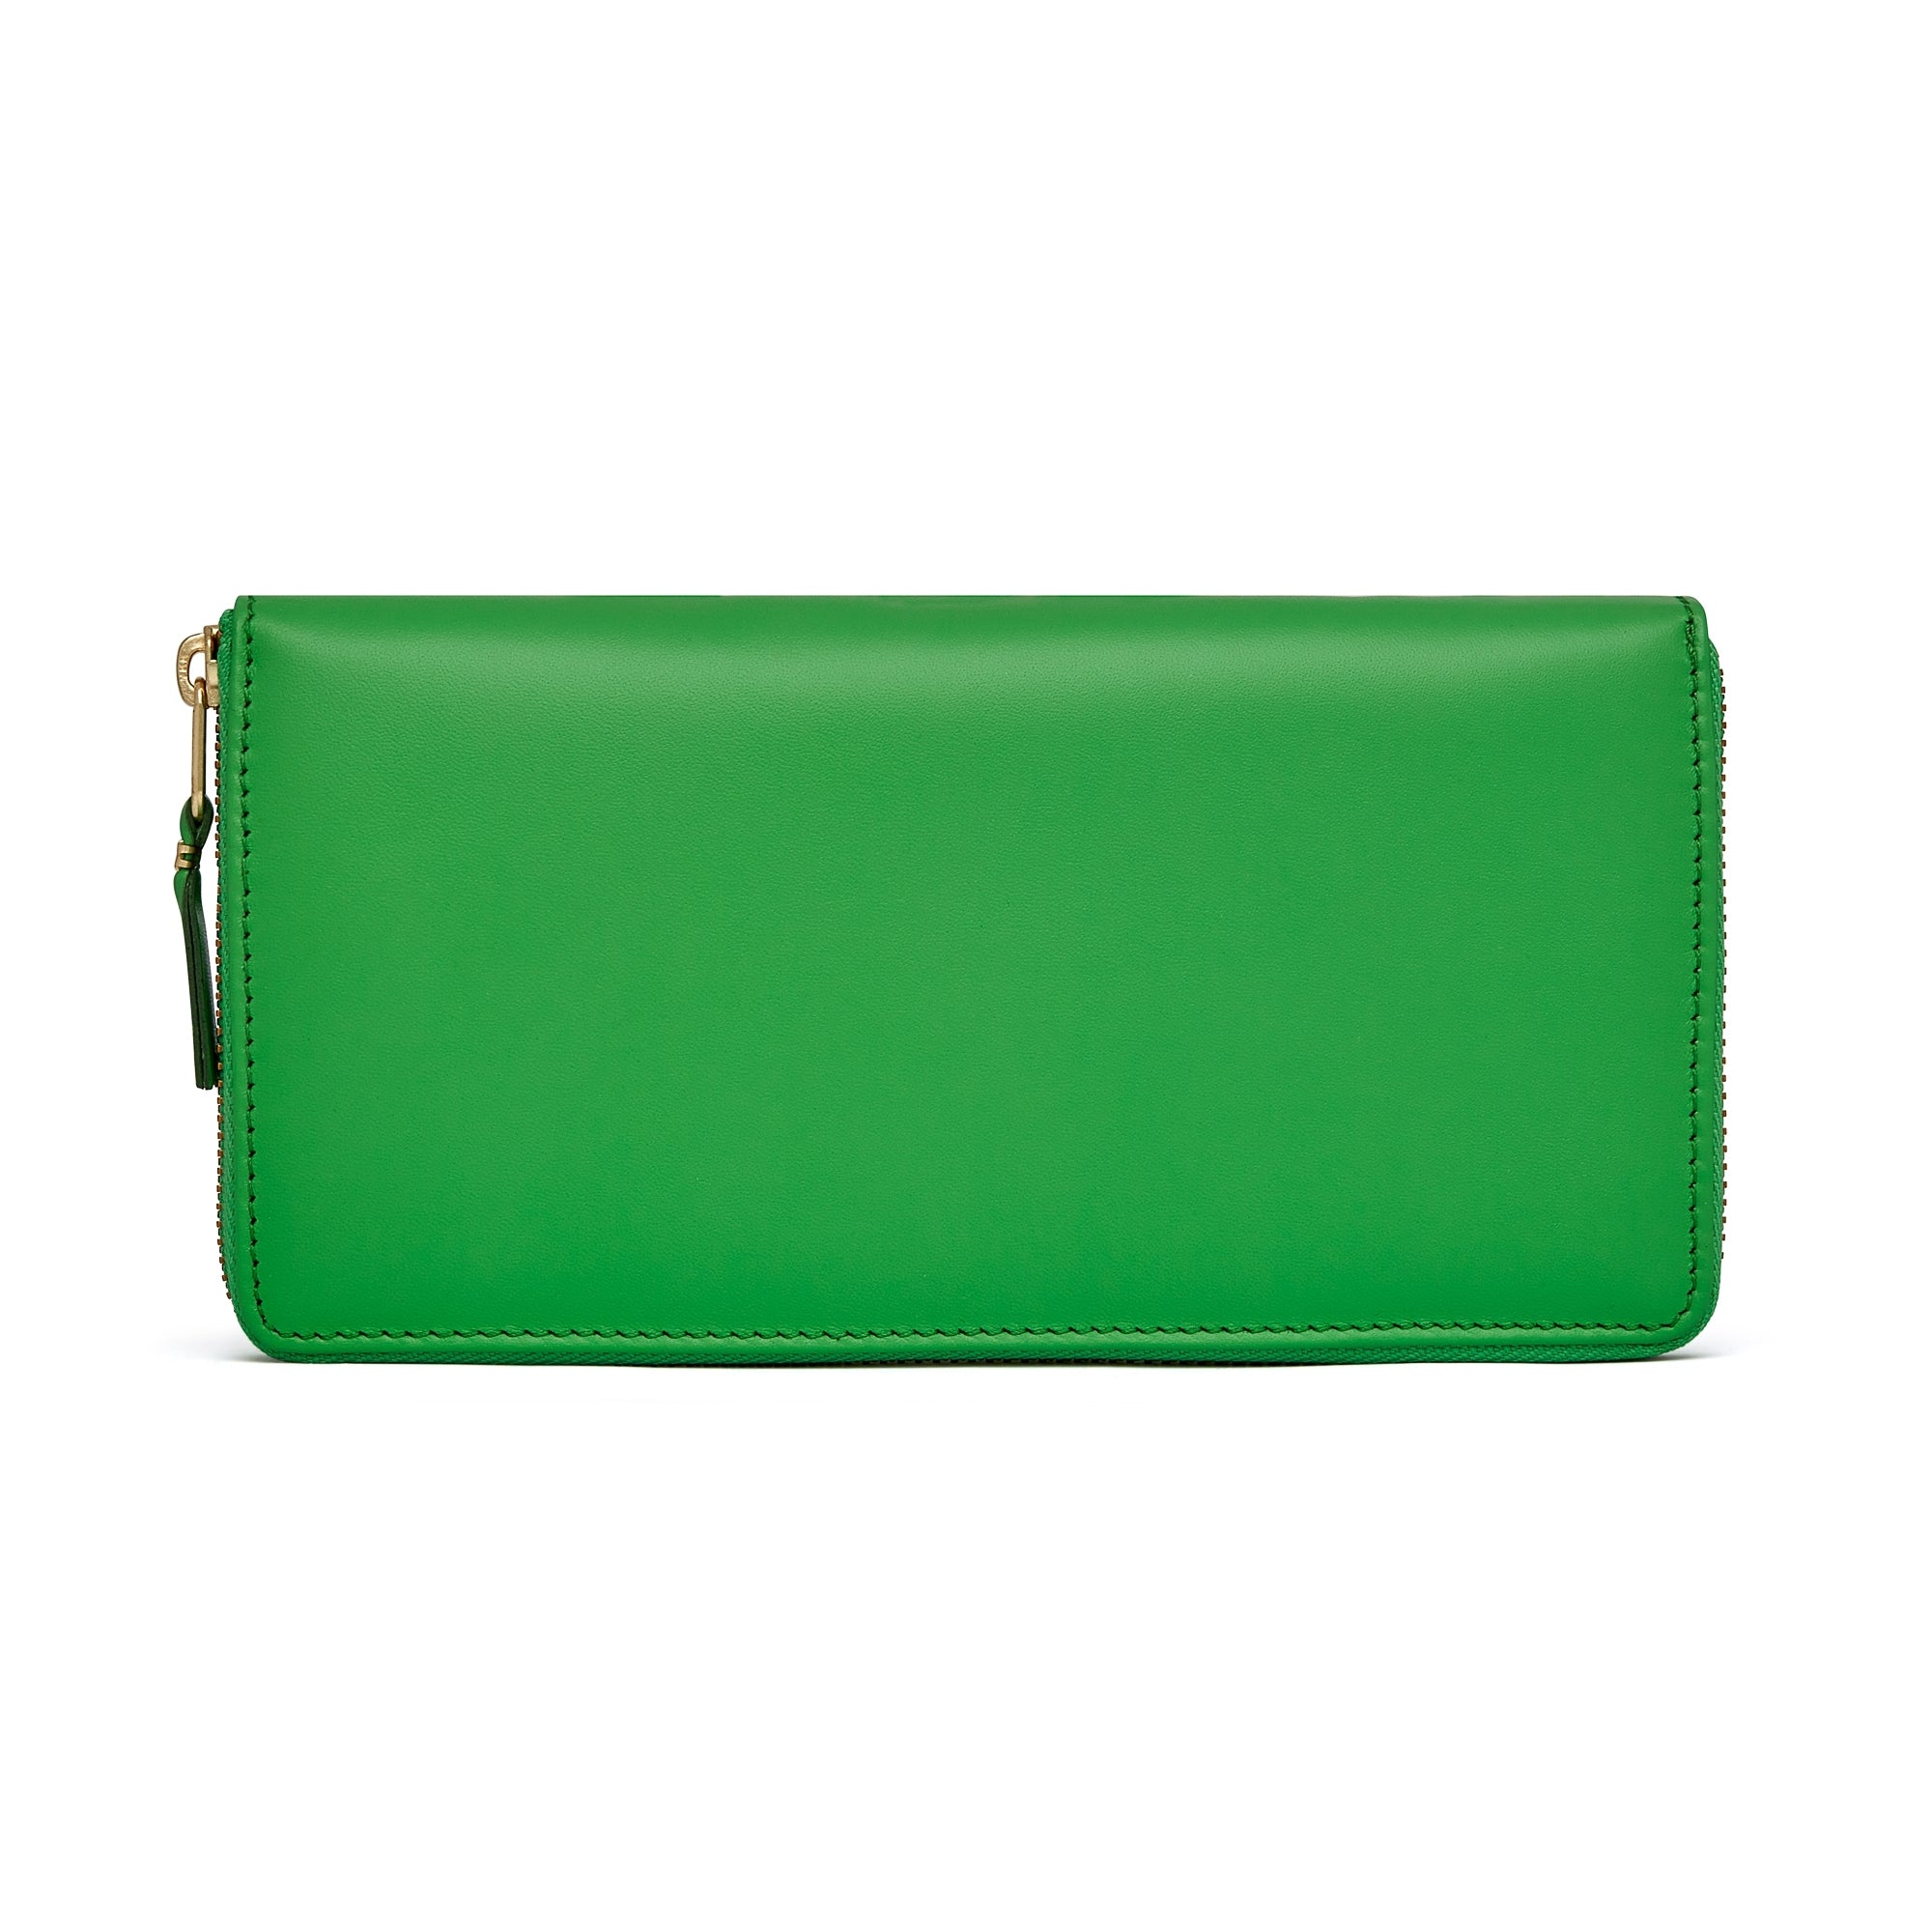 CDG WALLET - Colored Leather - (SA0110 Green) view 1